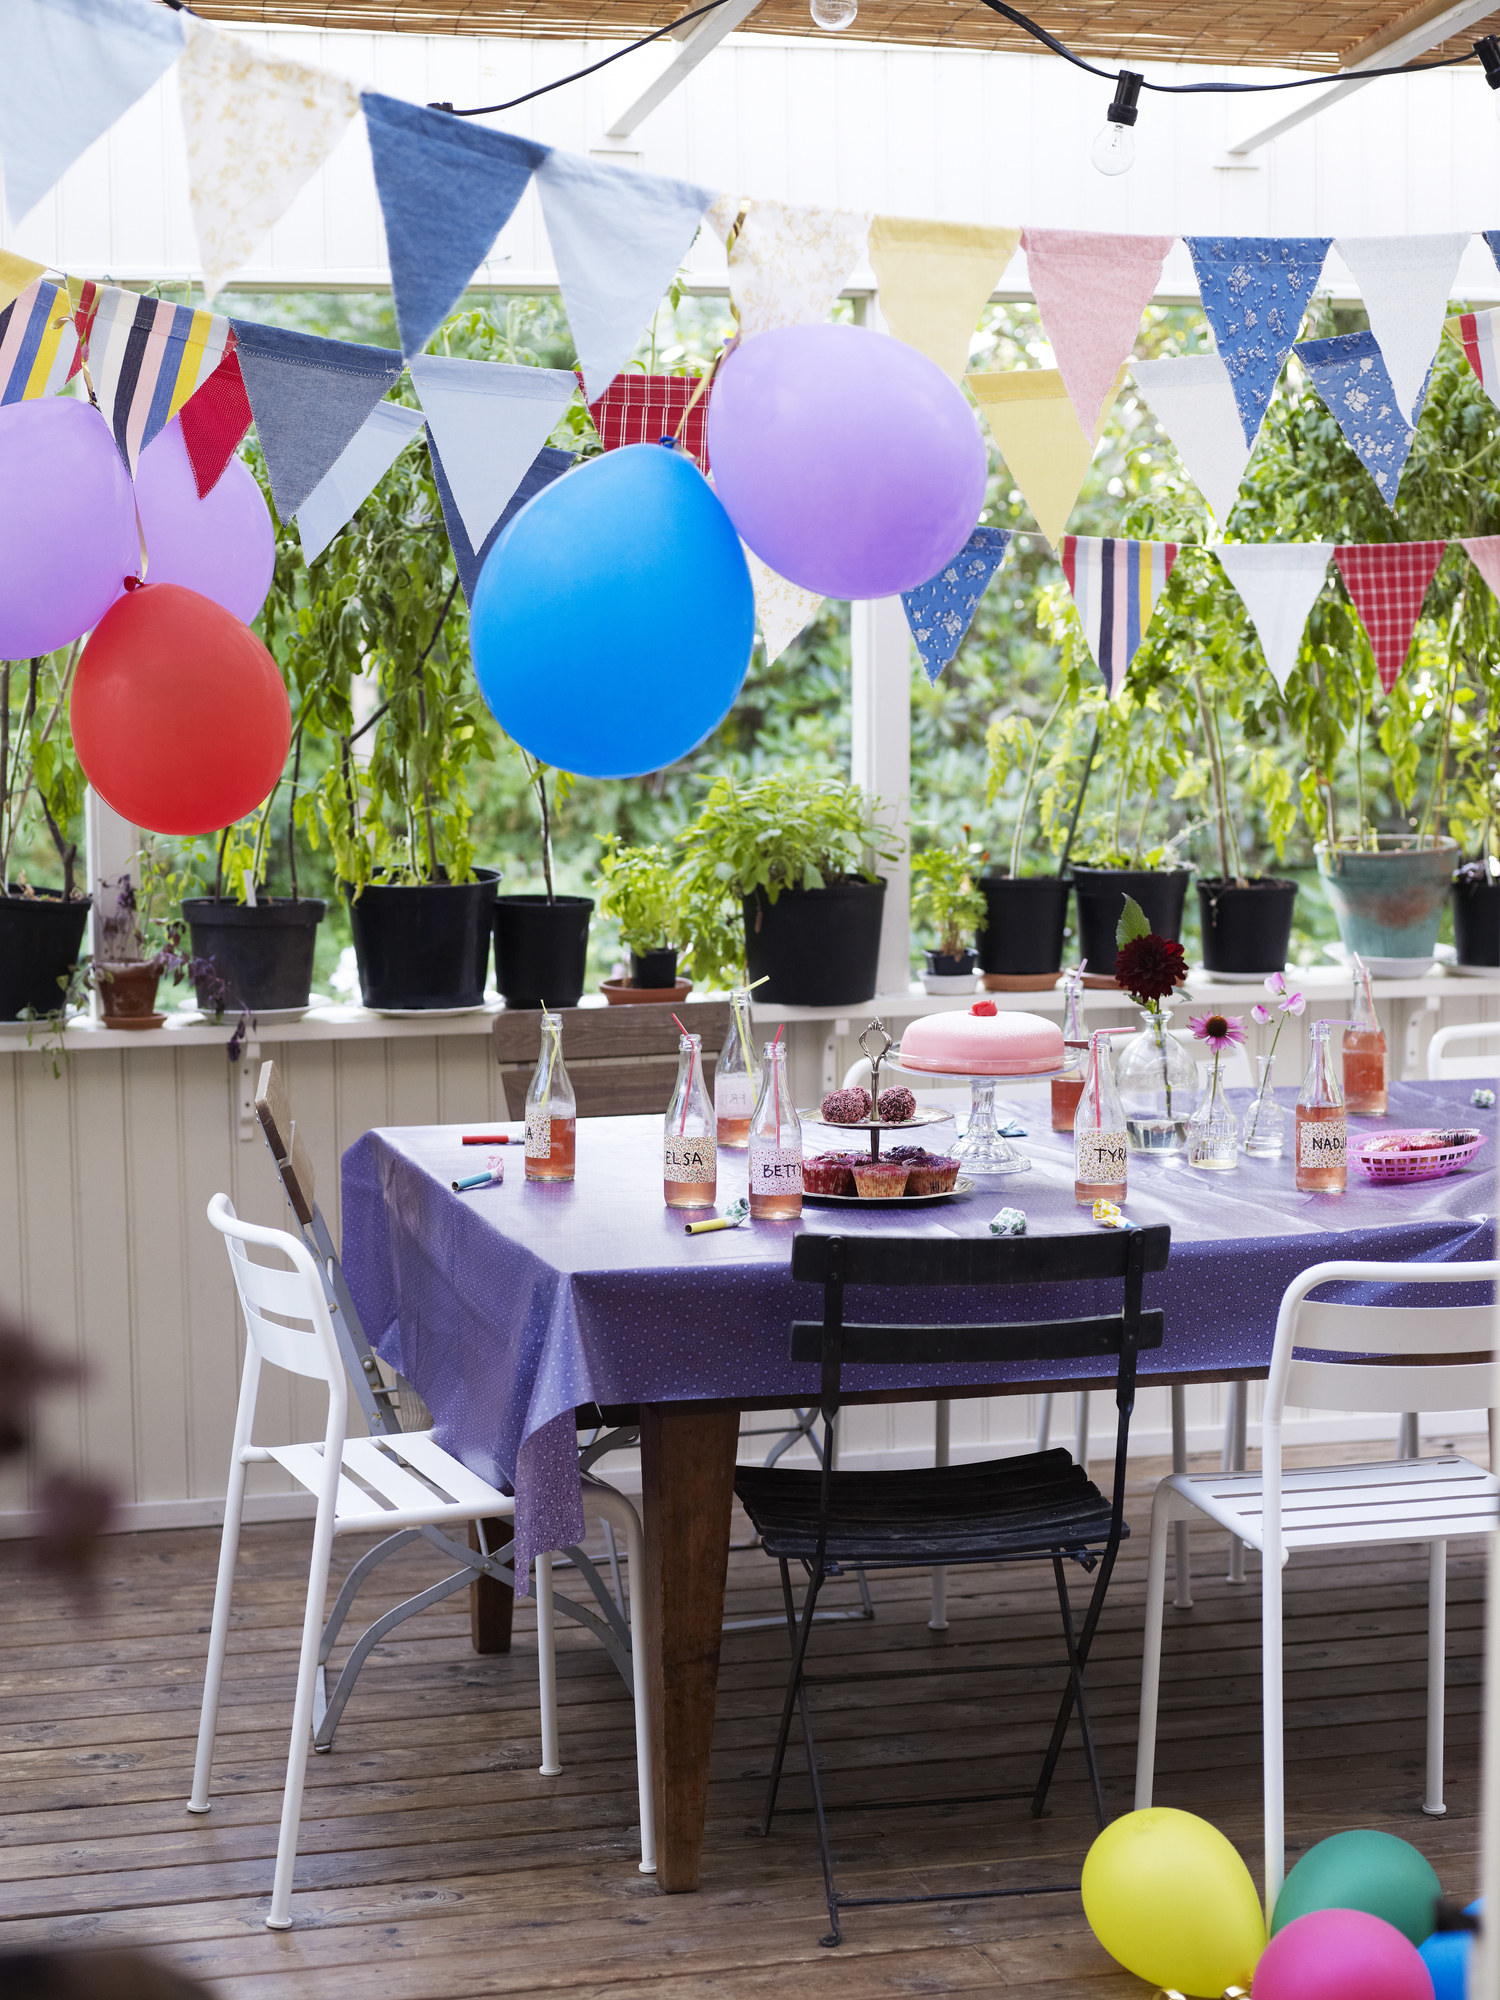 A birthday party set up on an outdoor deck with balloons